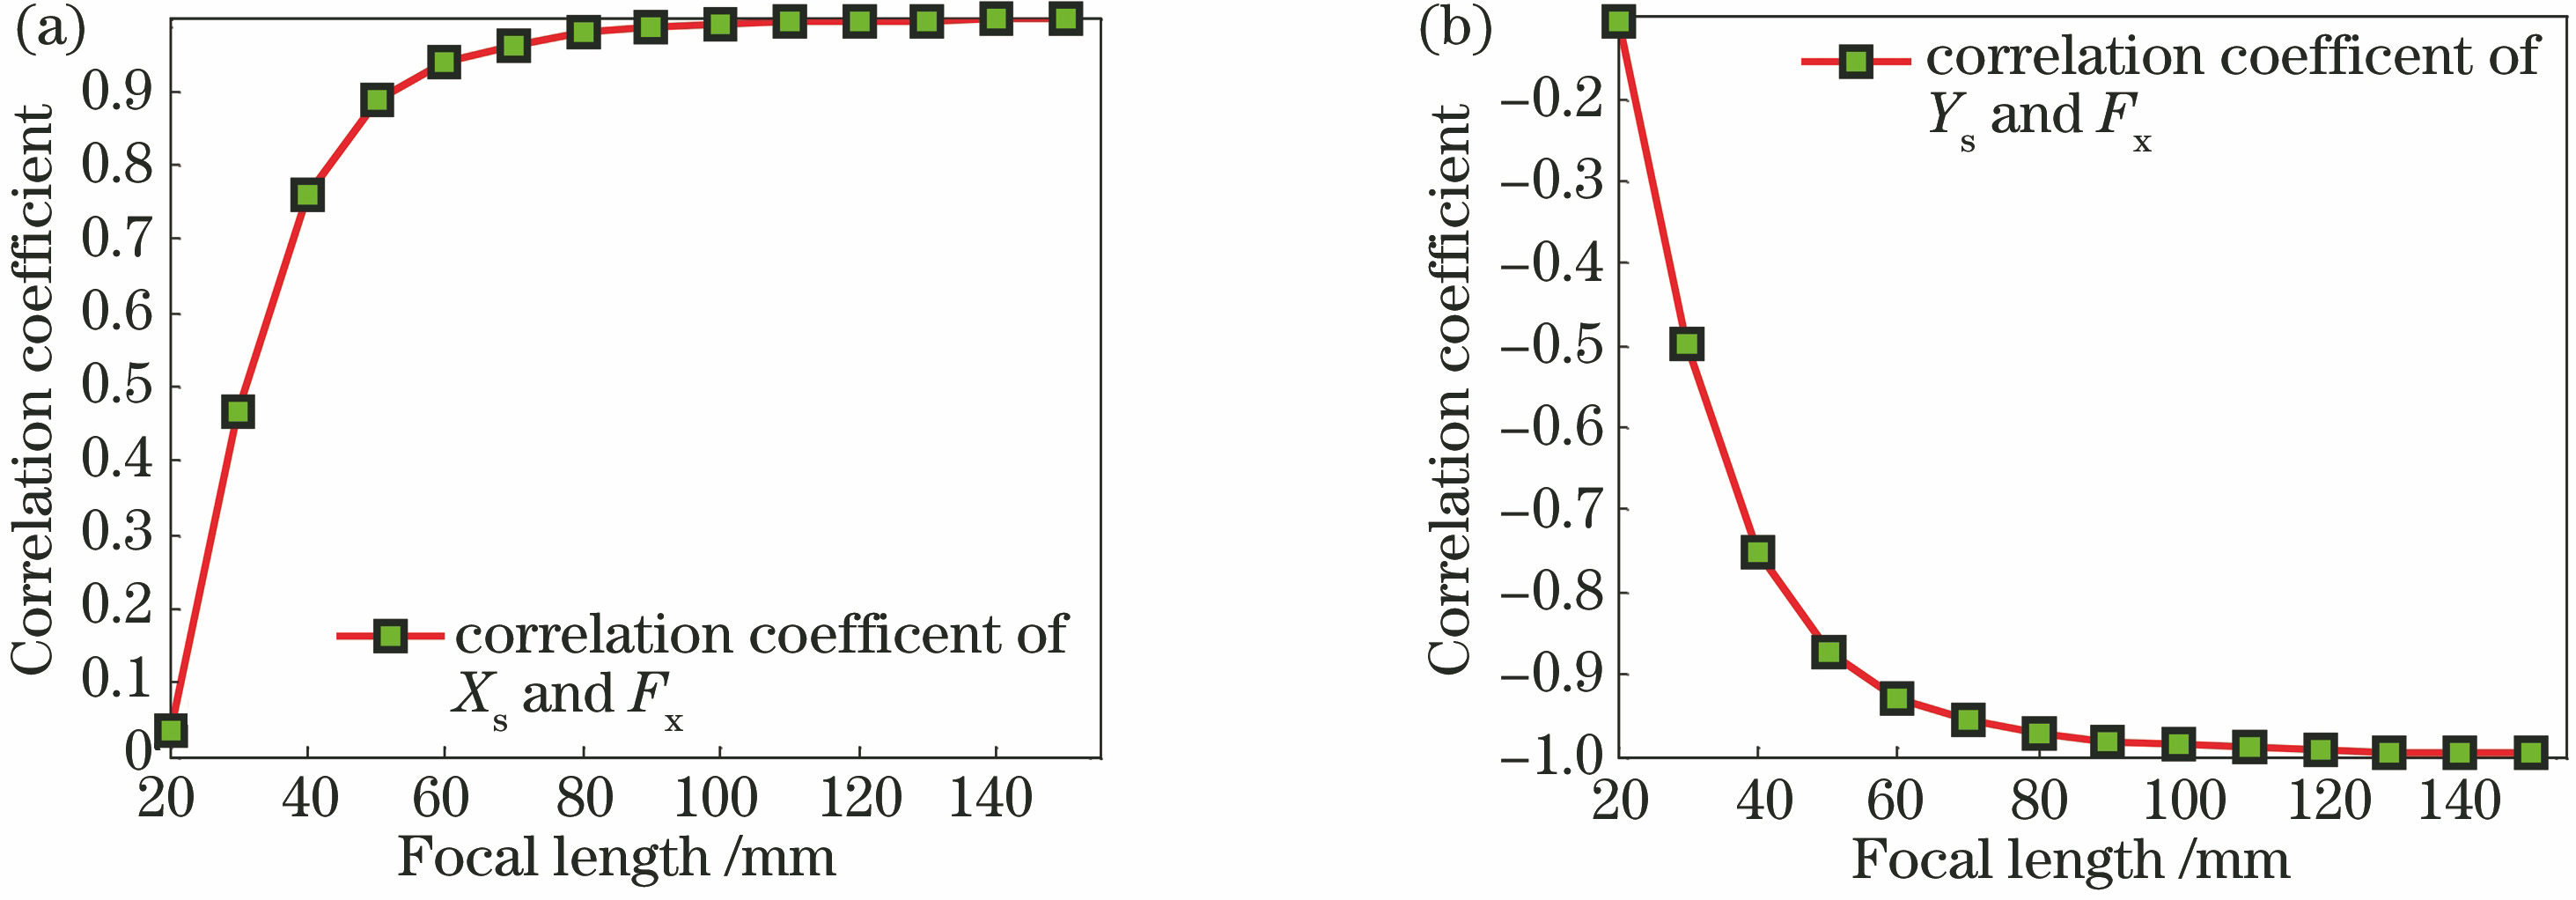 Correlation coefficient between translation component and equivalent focal length of camera varying with focal length. (a) Translation component in x direction; (b) translation component in y direction